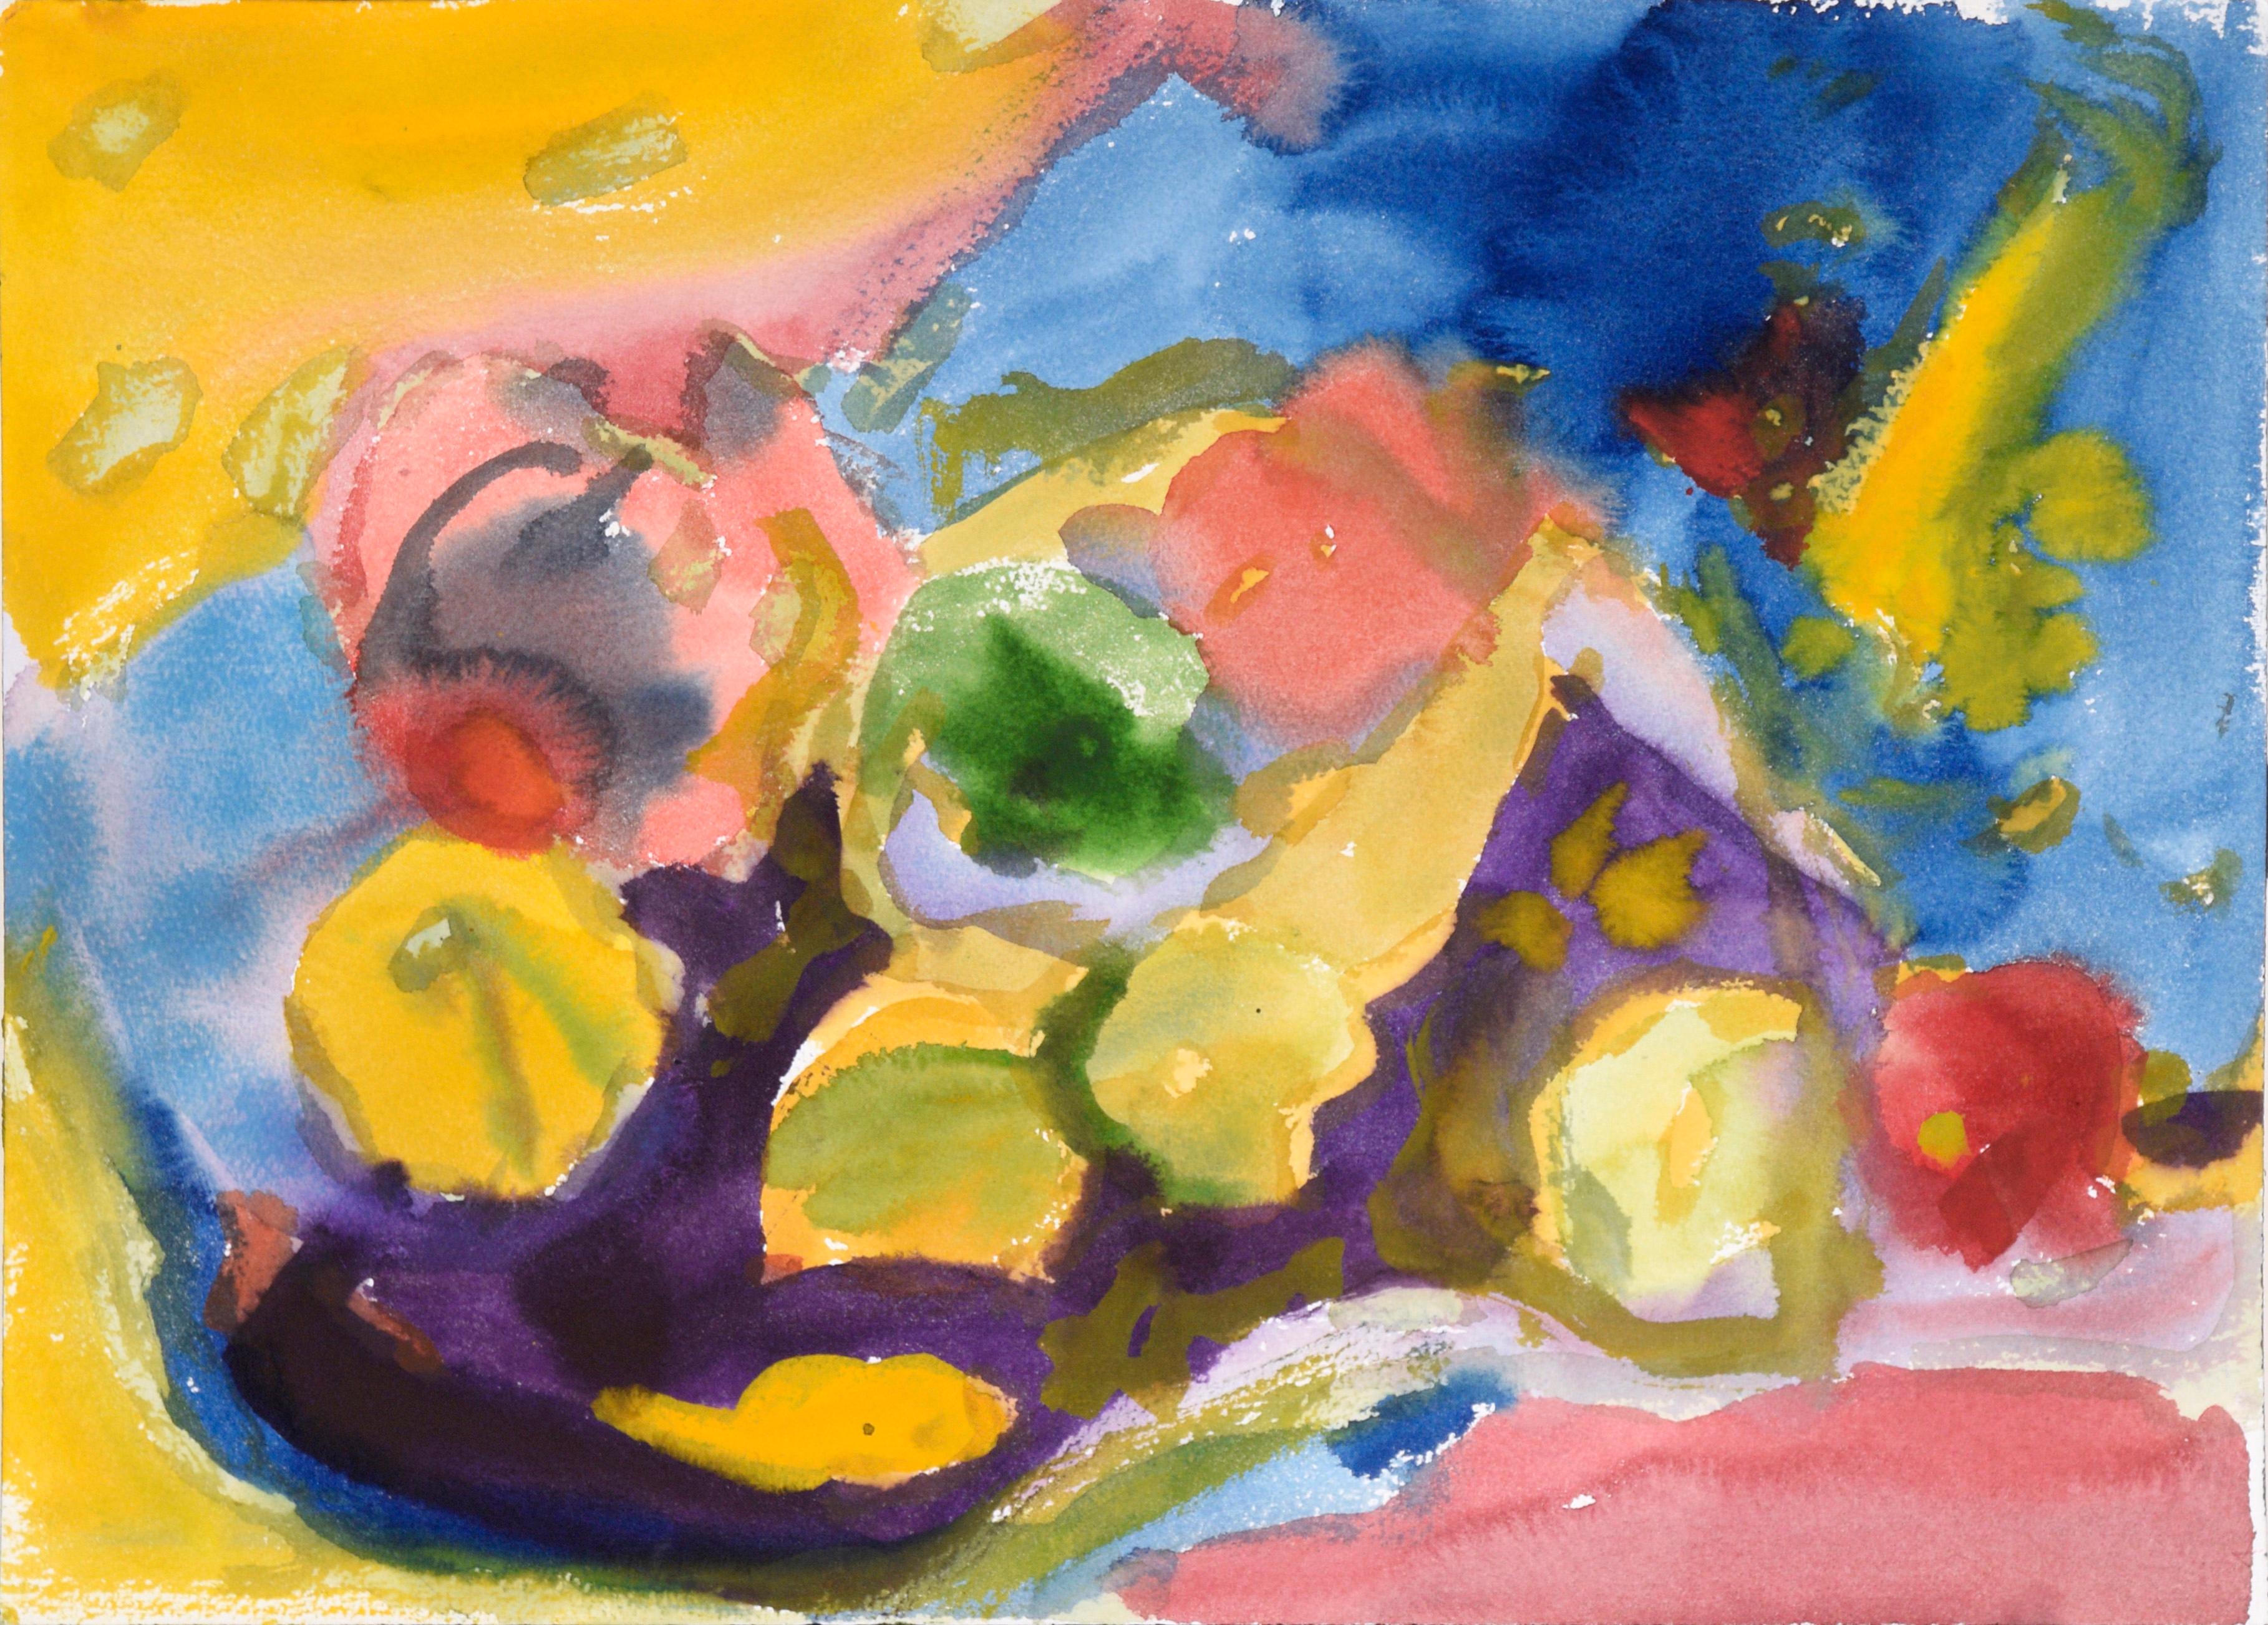 Abstract Still Life with Fruit in Watercolor on Paper